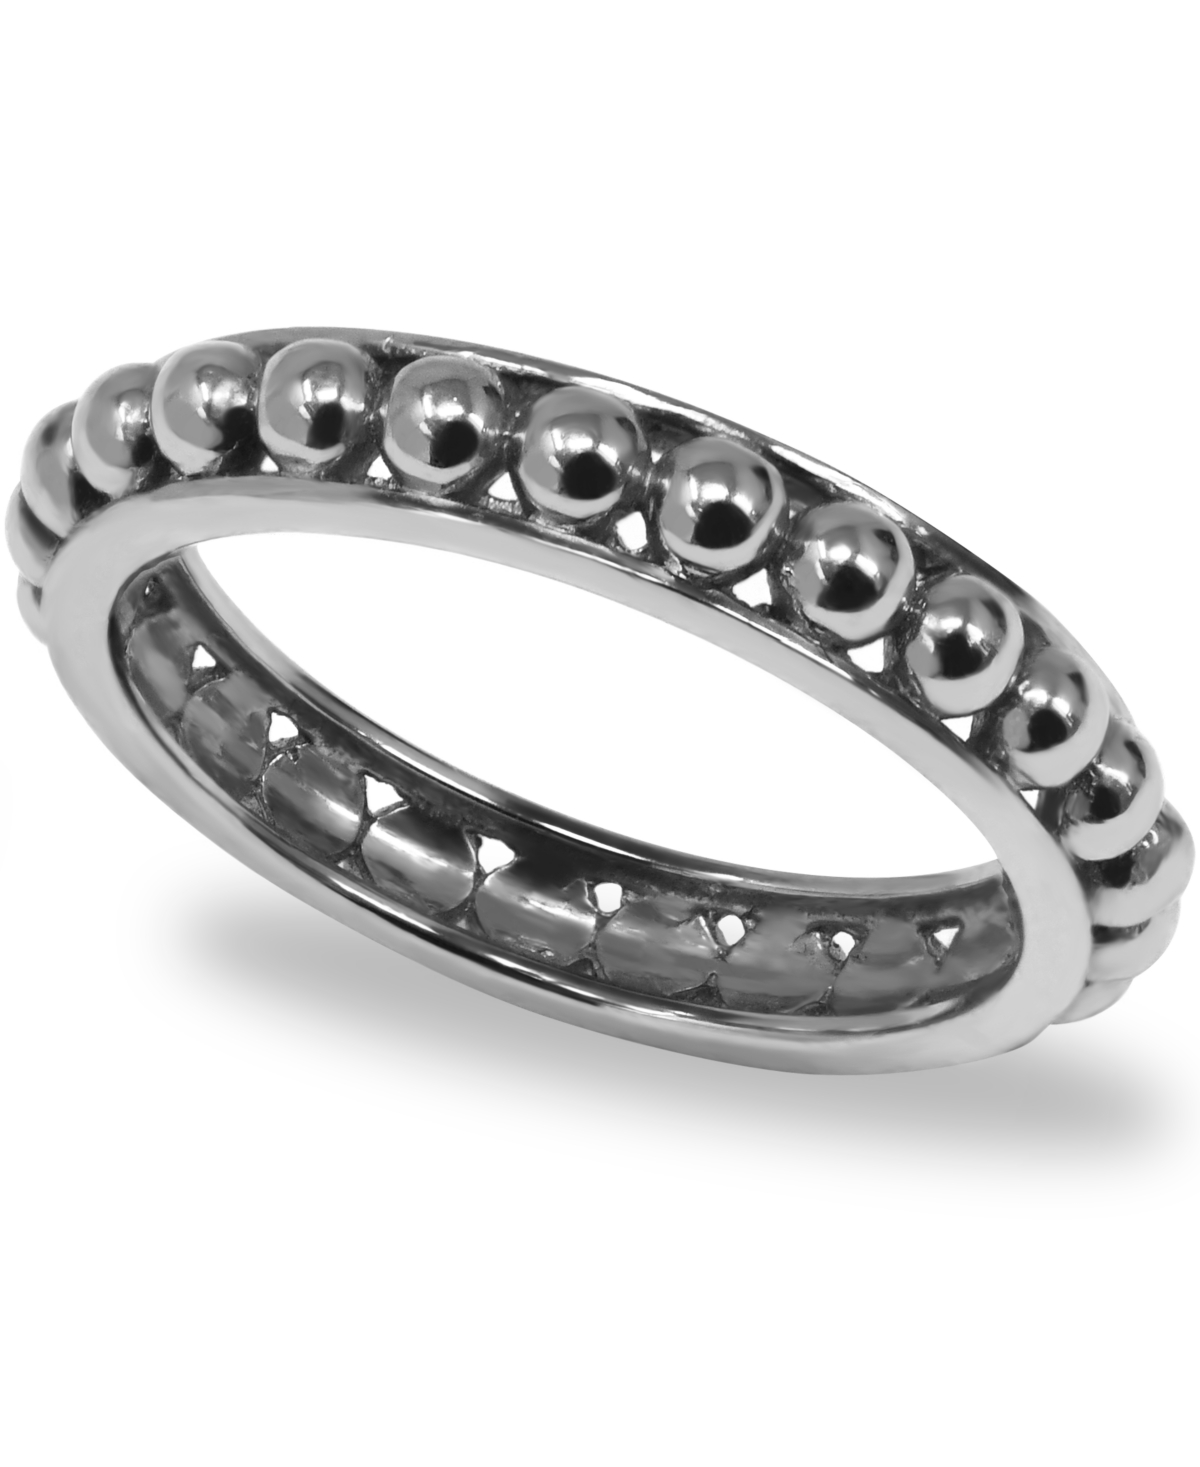 Stratta Dotted Ring Band In Sterling Silver - Silver